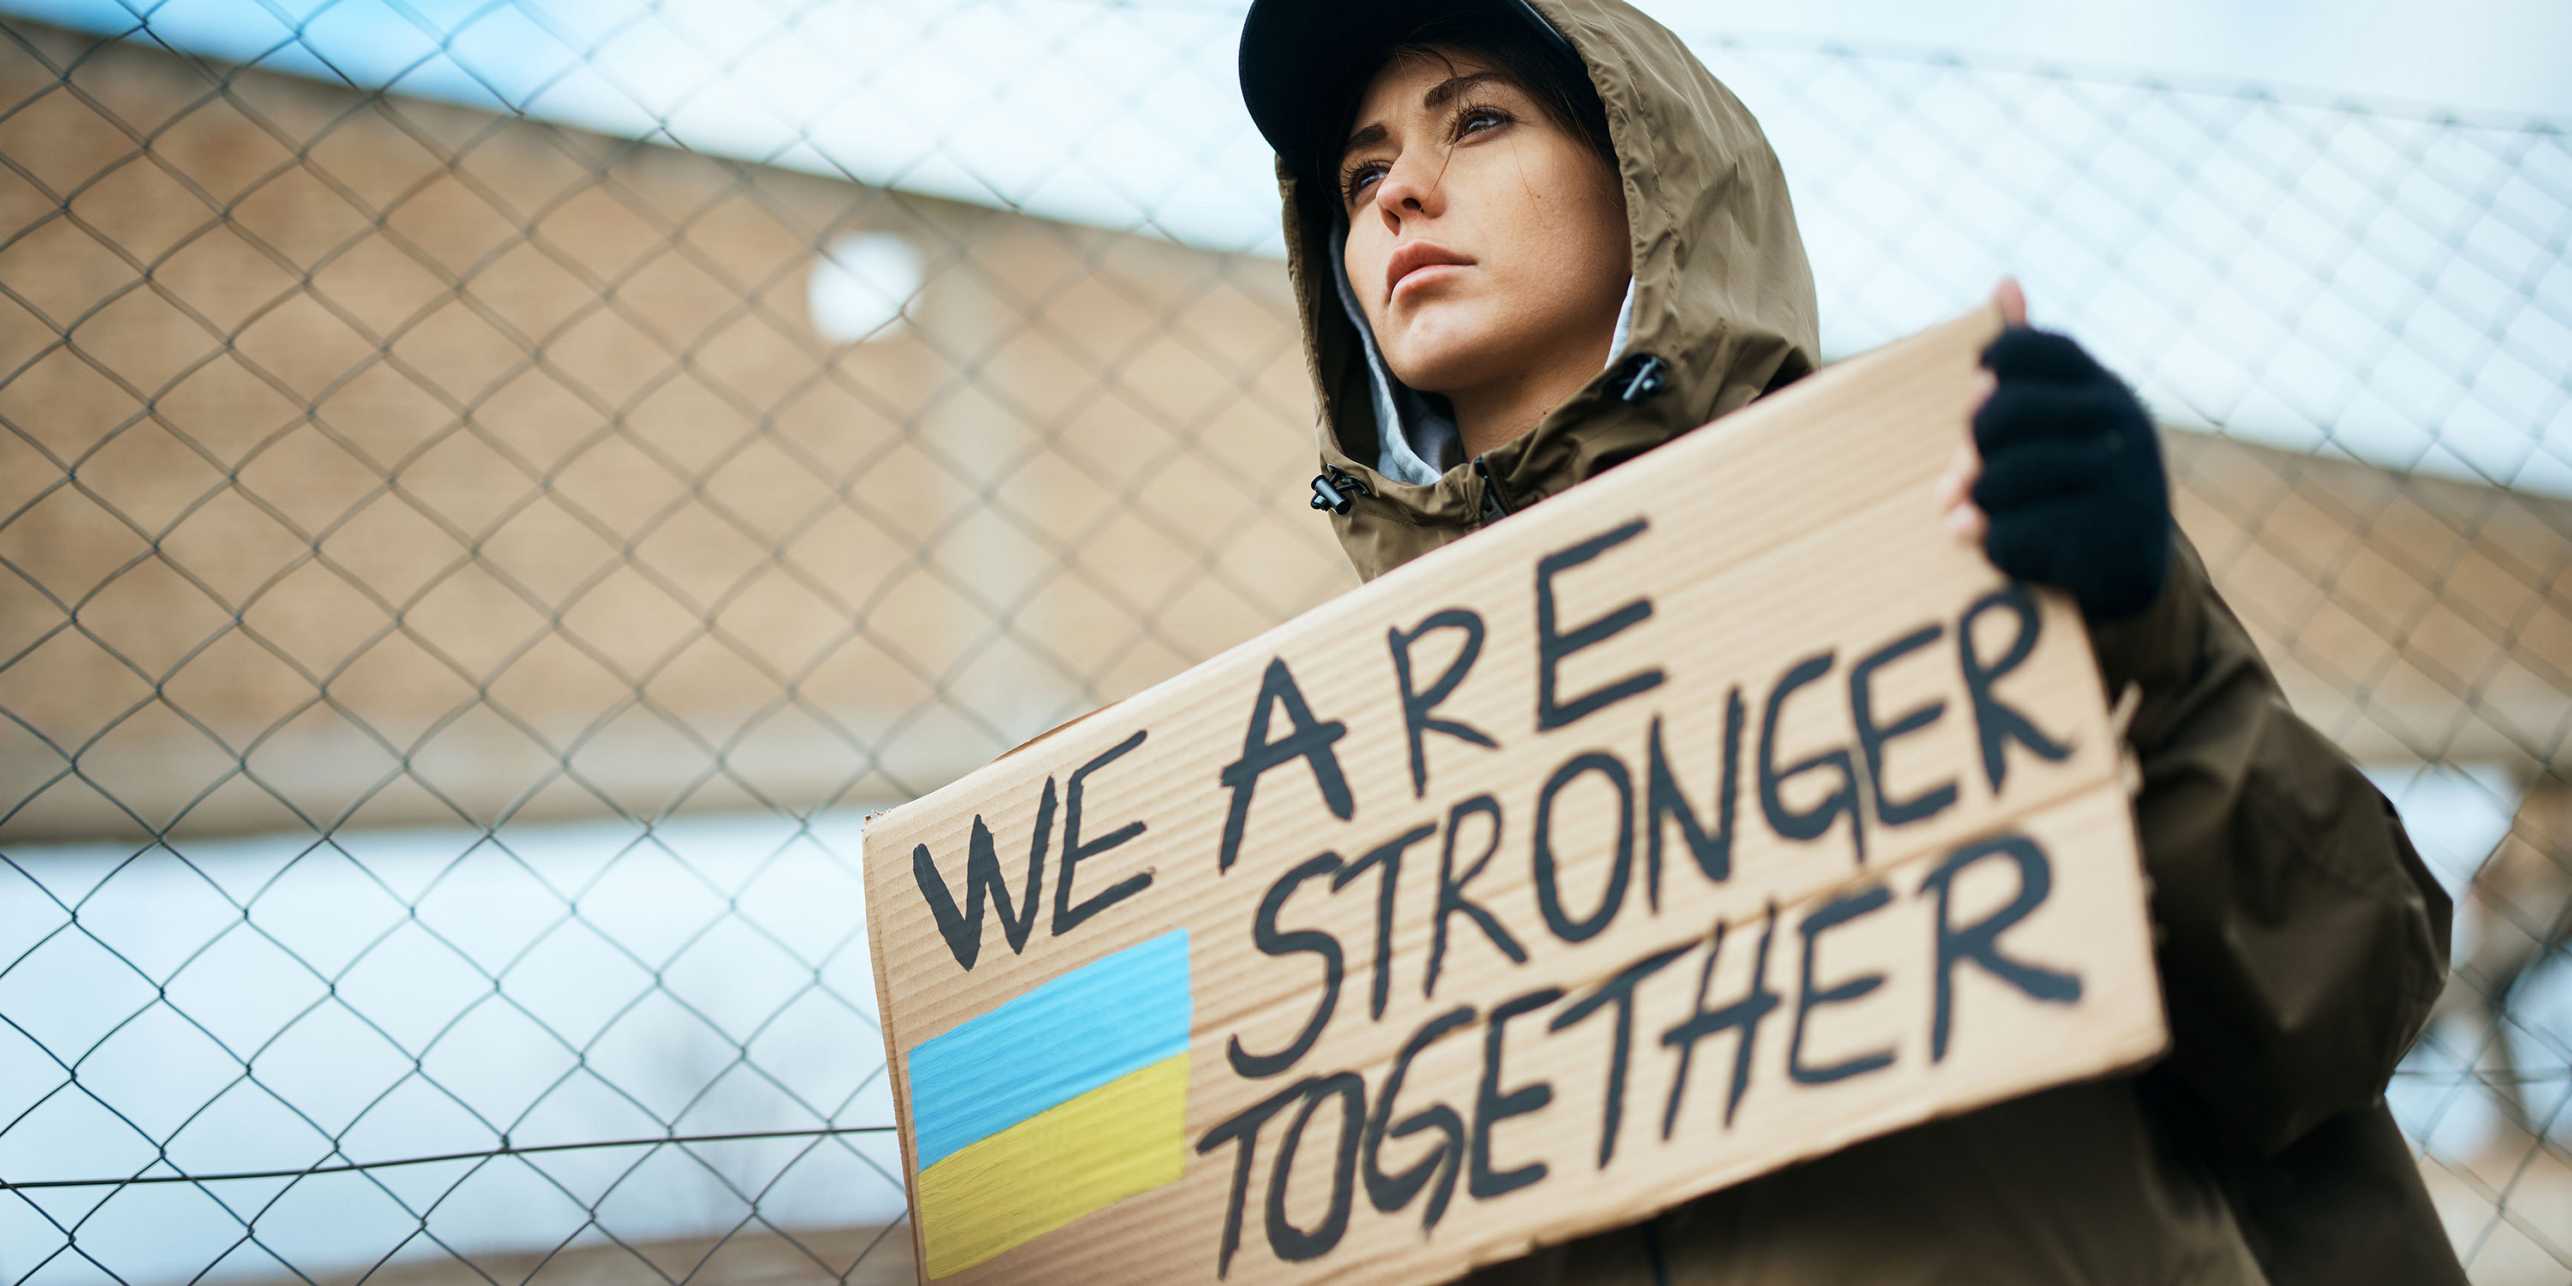 A Ukranian protester holding a sign: "We are stronger together" 